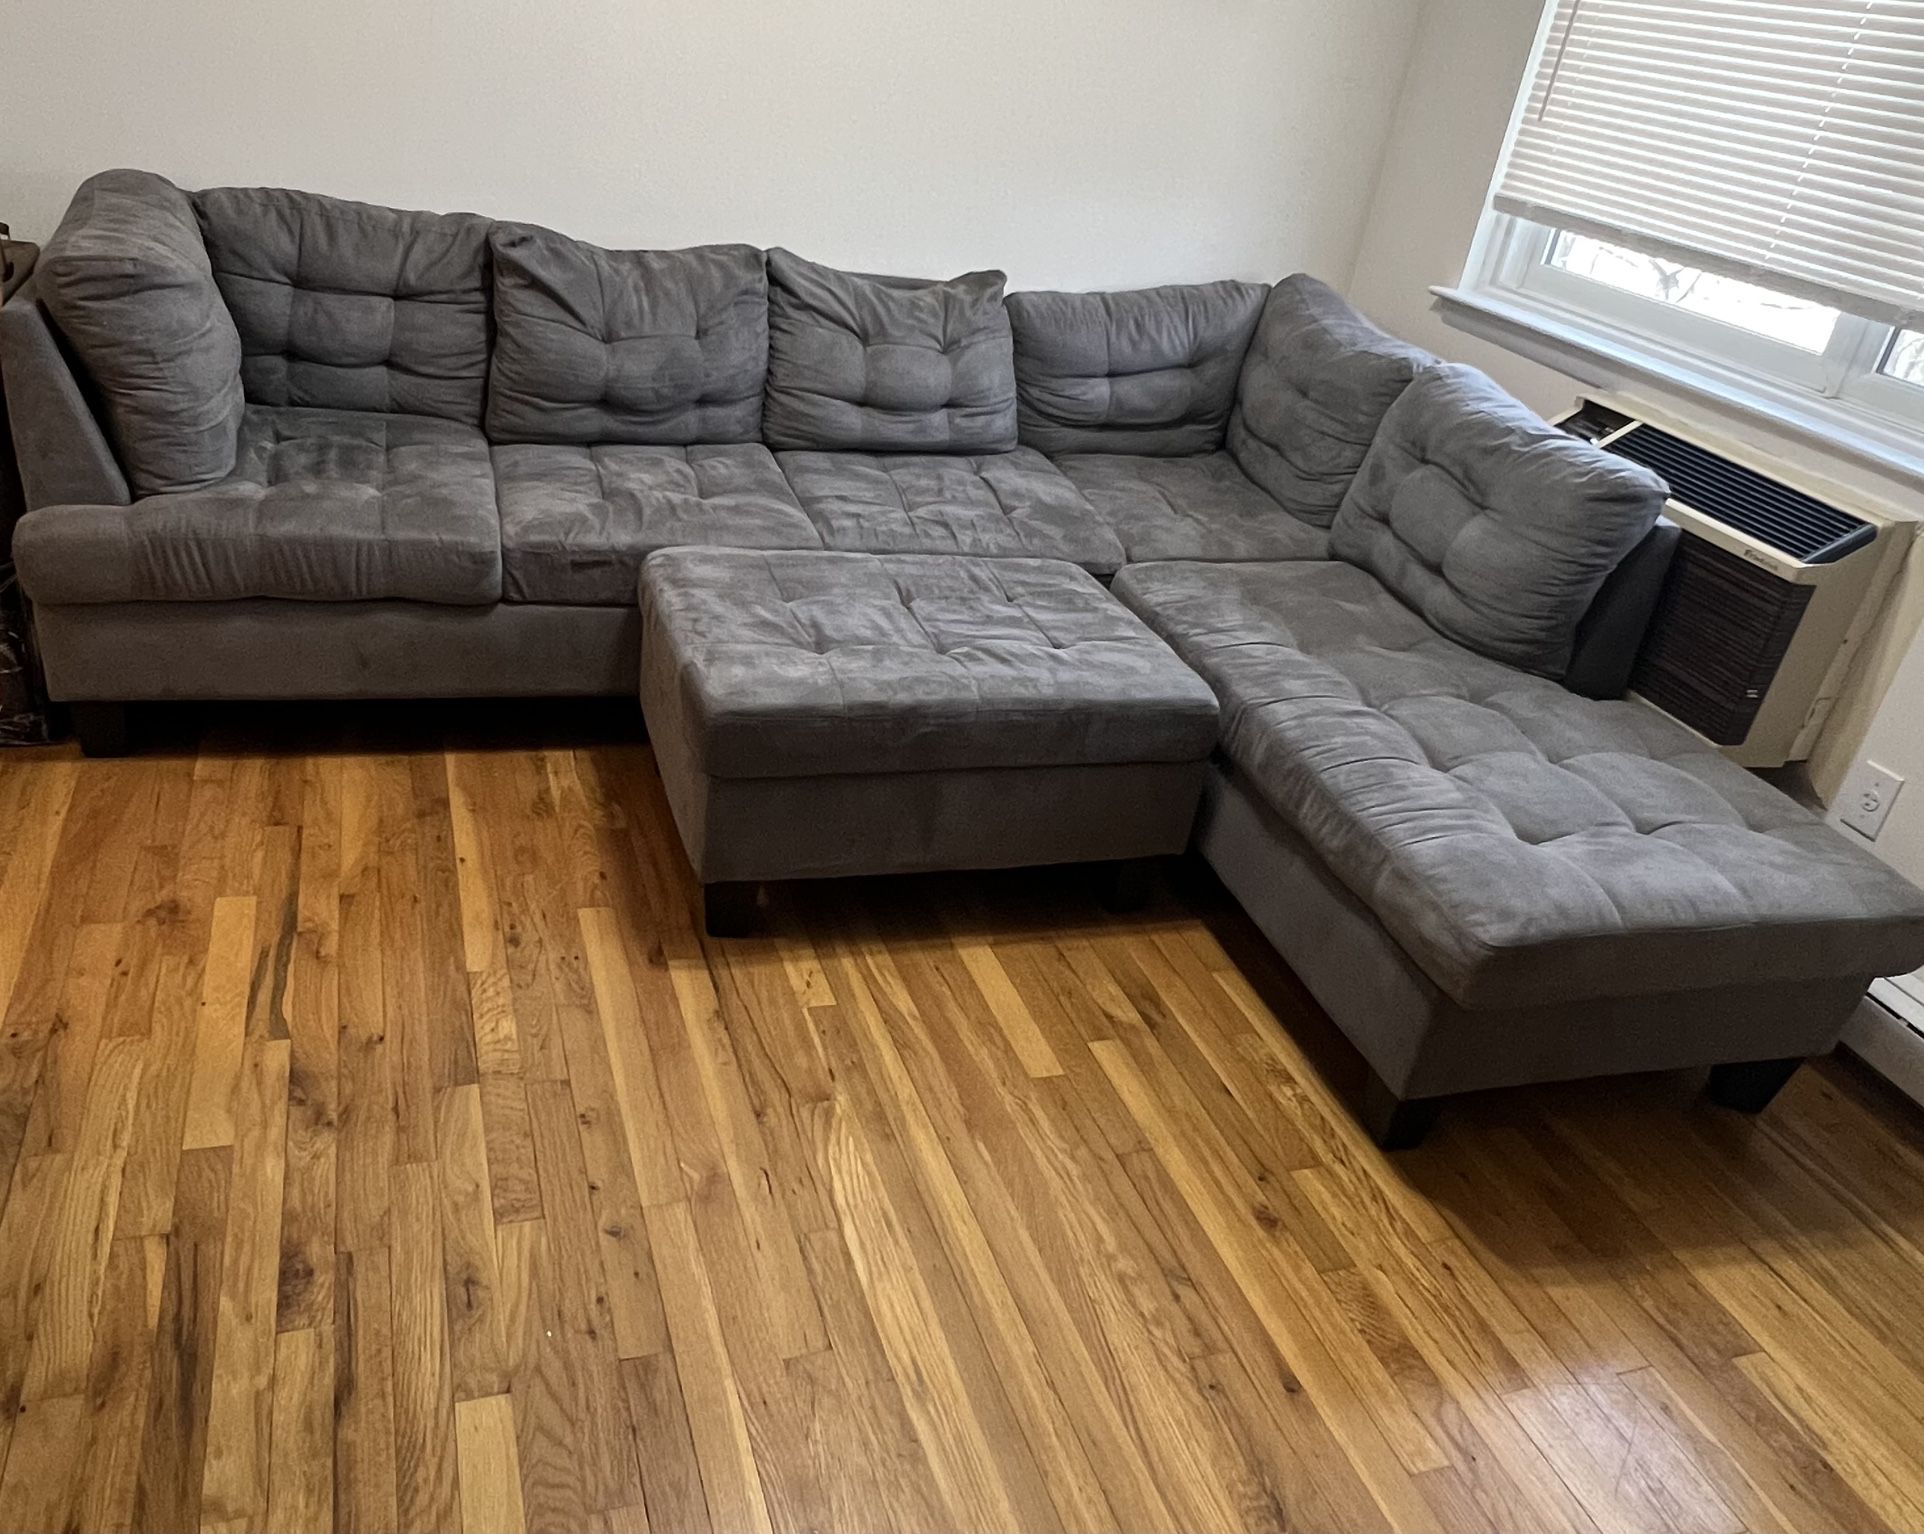 Huge Grey L Sectional Couch Sleeper Amazon Basics With Still Available No delivery 